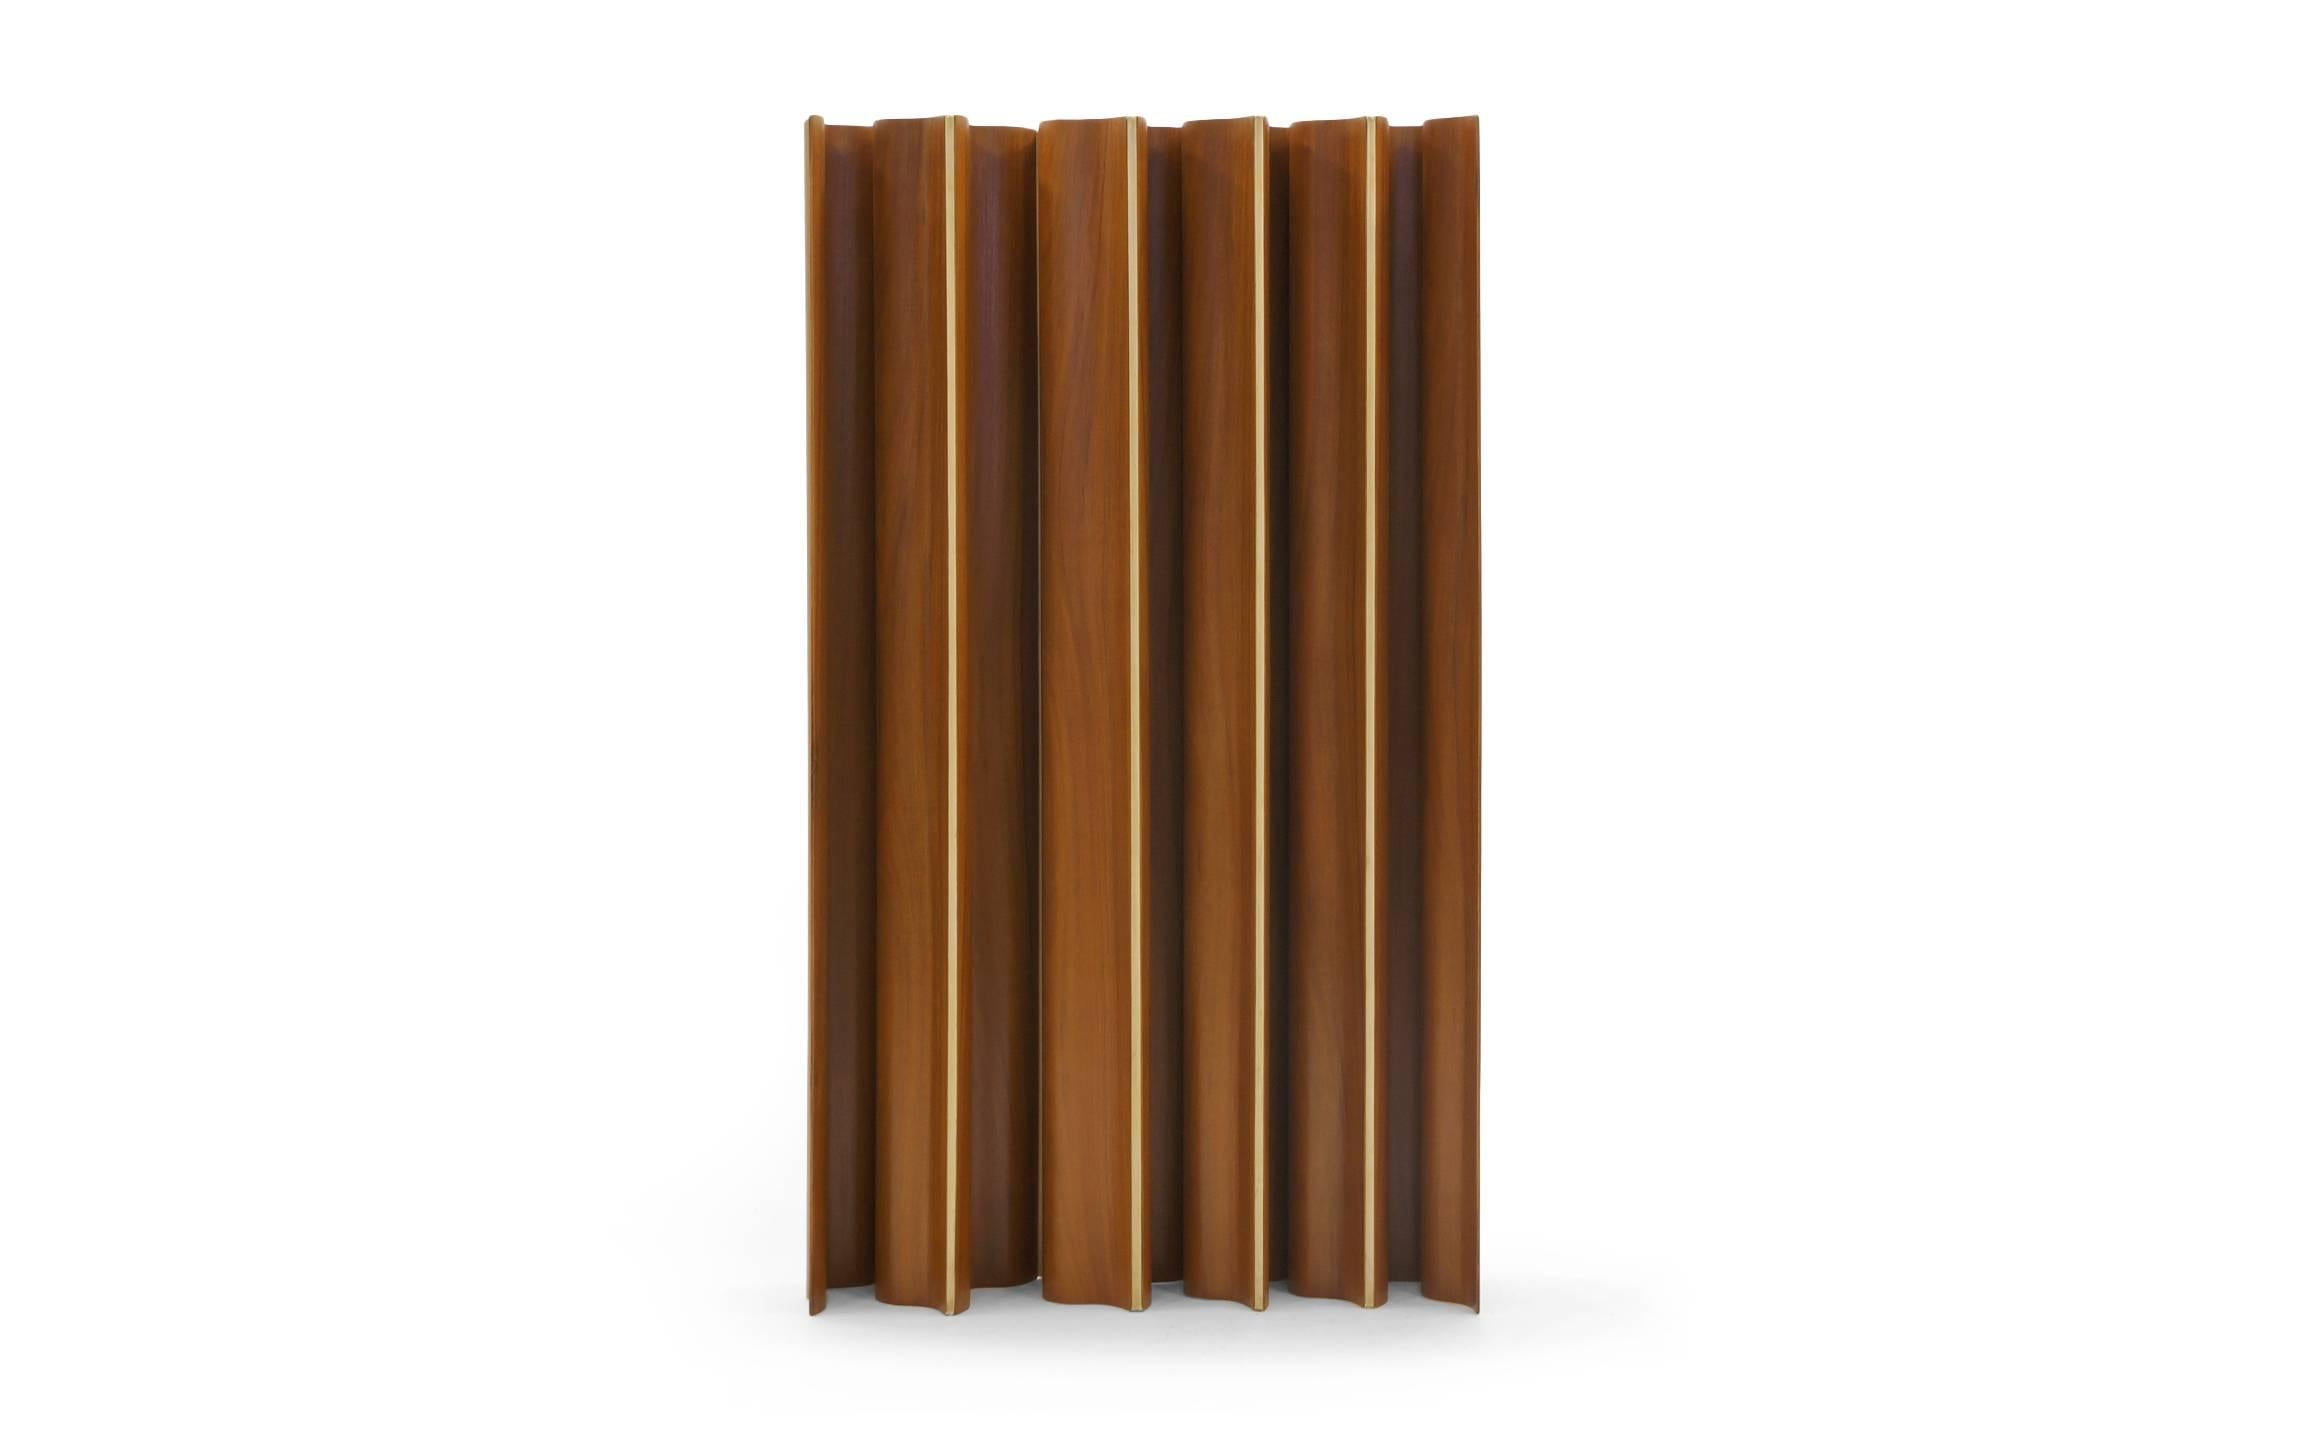 Molded plywood folding screen designed by Charles and Ray Eames, 1948. Eames folding screens were offered in six, eight and ten panel sizes. This rare and stunning example is made of ten hinged panels in teak.